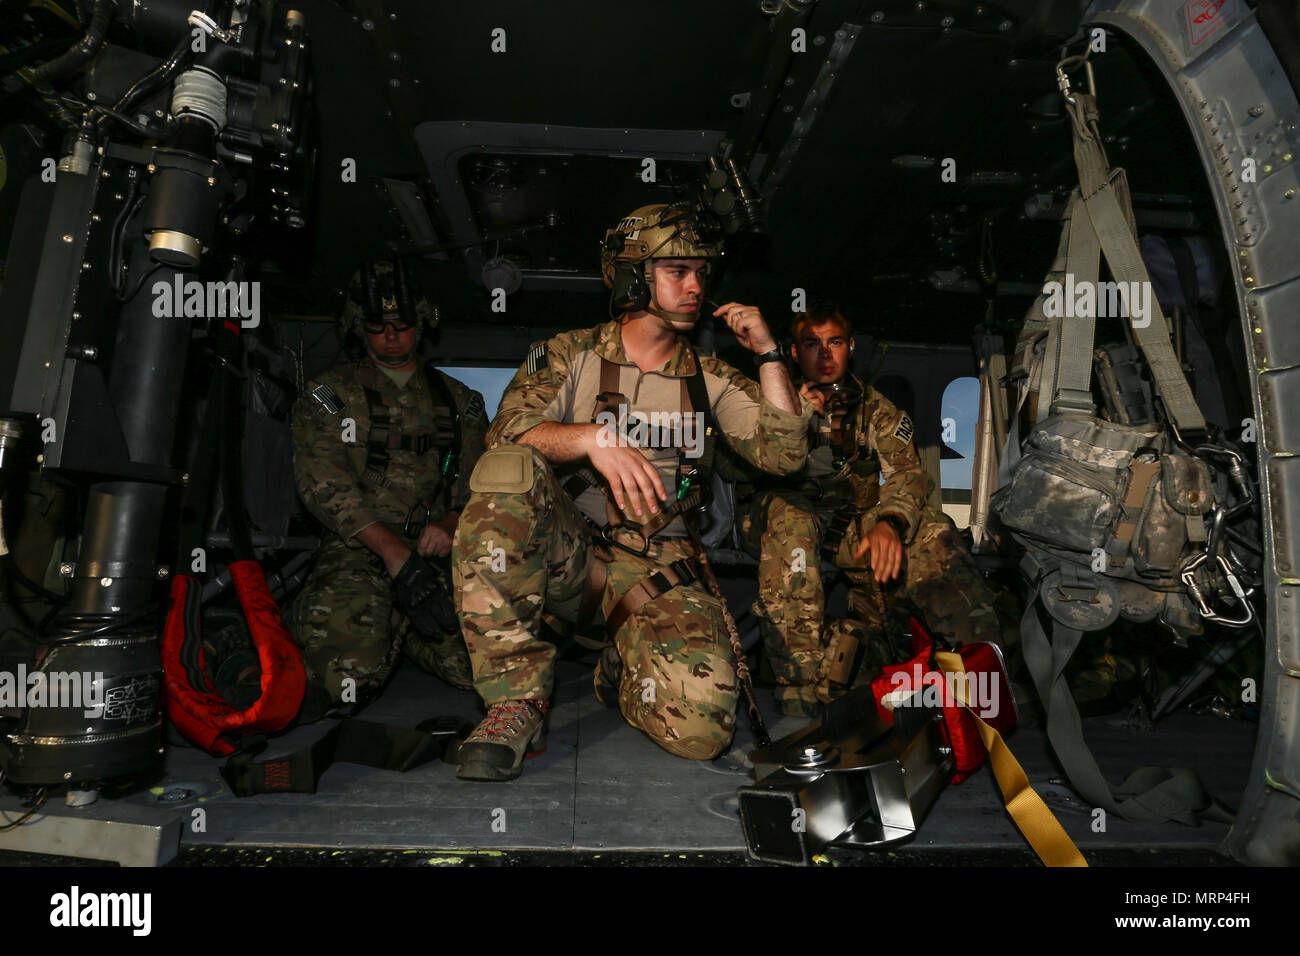 U.S. Air Force Airmen from the New Jersey Air National Guard's 227th Air Support Operations Squadron prepare to lift off in a UH-60 Black Hawk helicopter during joint training for New Jersey Task Force One at Joint Base McGuire-Dix-Lakehurst, N.J., June 28, 2017. The primary mission of New Jersey Task Force One is to provide advanced technical search and rescue capabilities to victims trapped or entombed in structurally collapsed buildings. Task Force One is made up of New Jersey National Guard Soldiers and Airmen, as well as civilians. (U.S. Air National Guard photo by Master Sgt. Matt Hecht/ Stock Photo